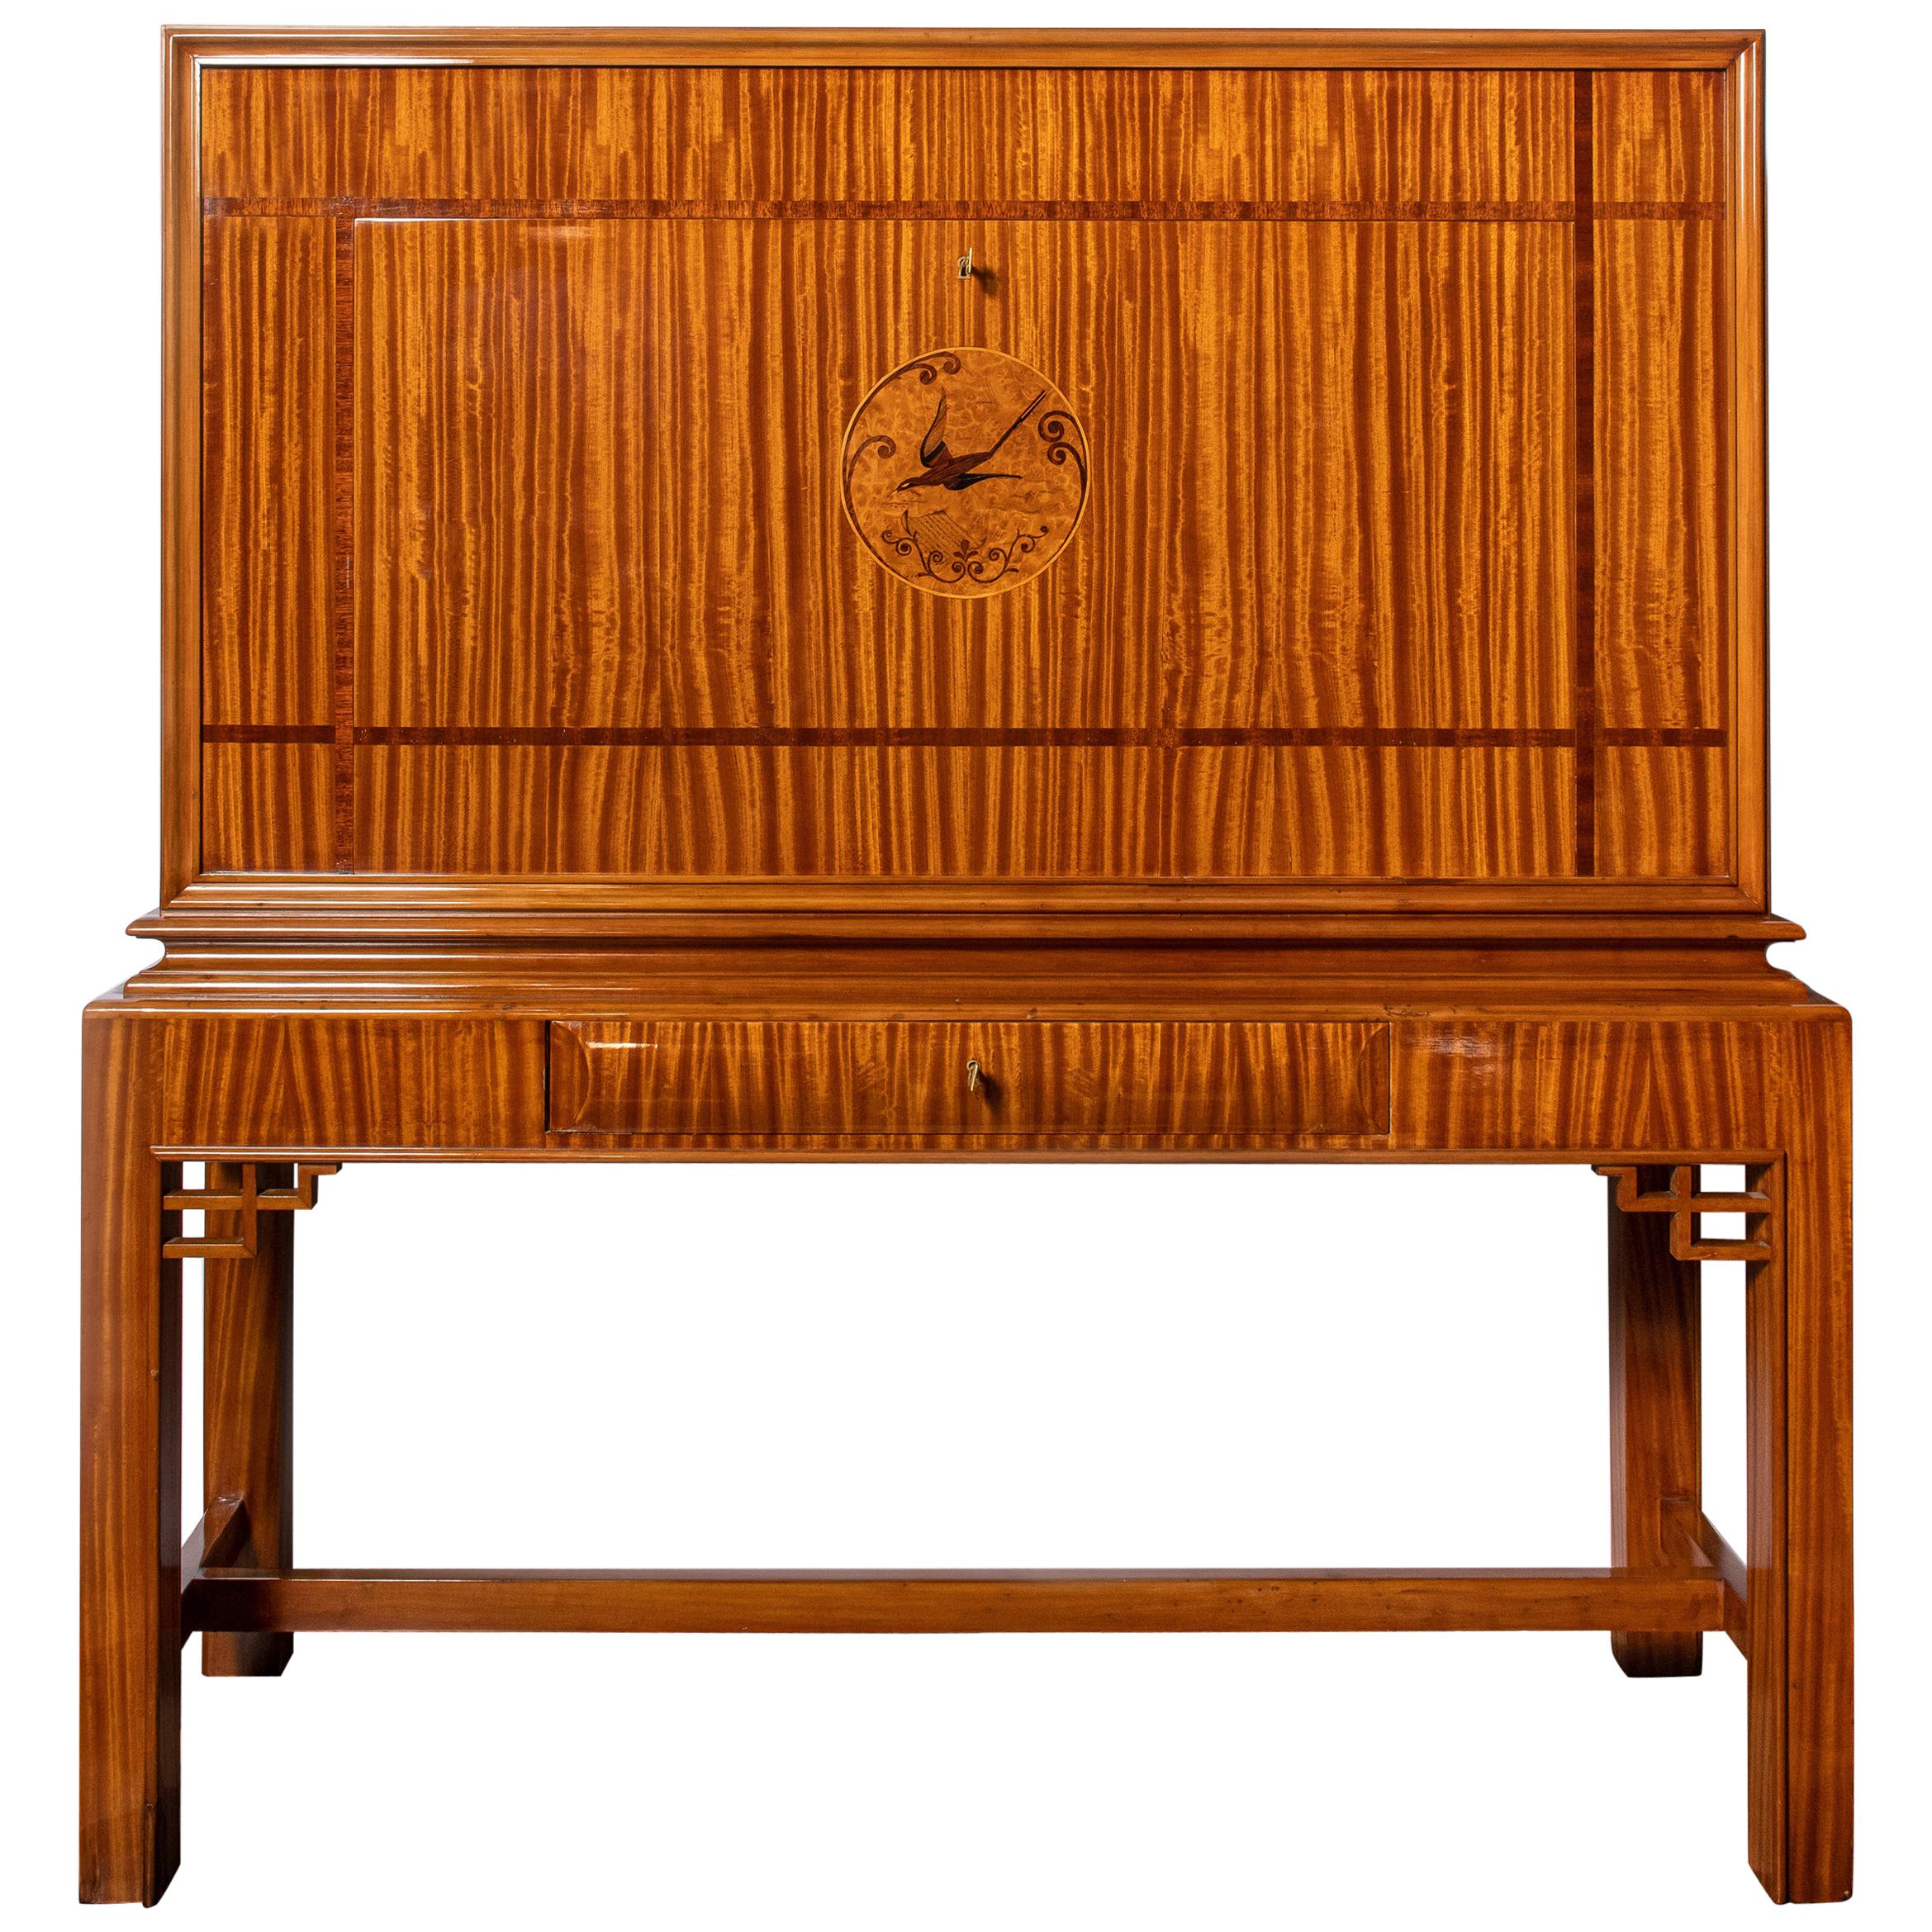 Citronnier Wood and Marquetry Secretaire by Englander & Bonta, Argentina, 1950 For Sale